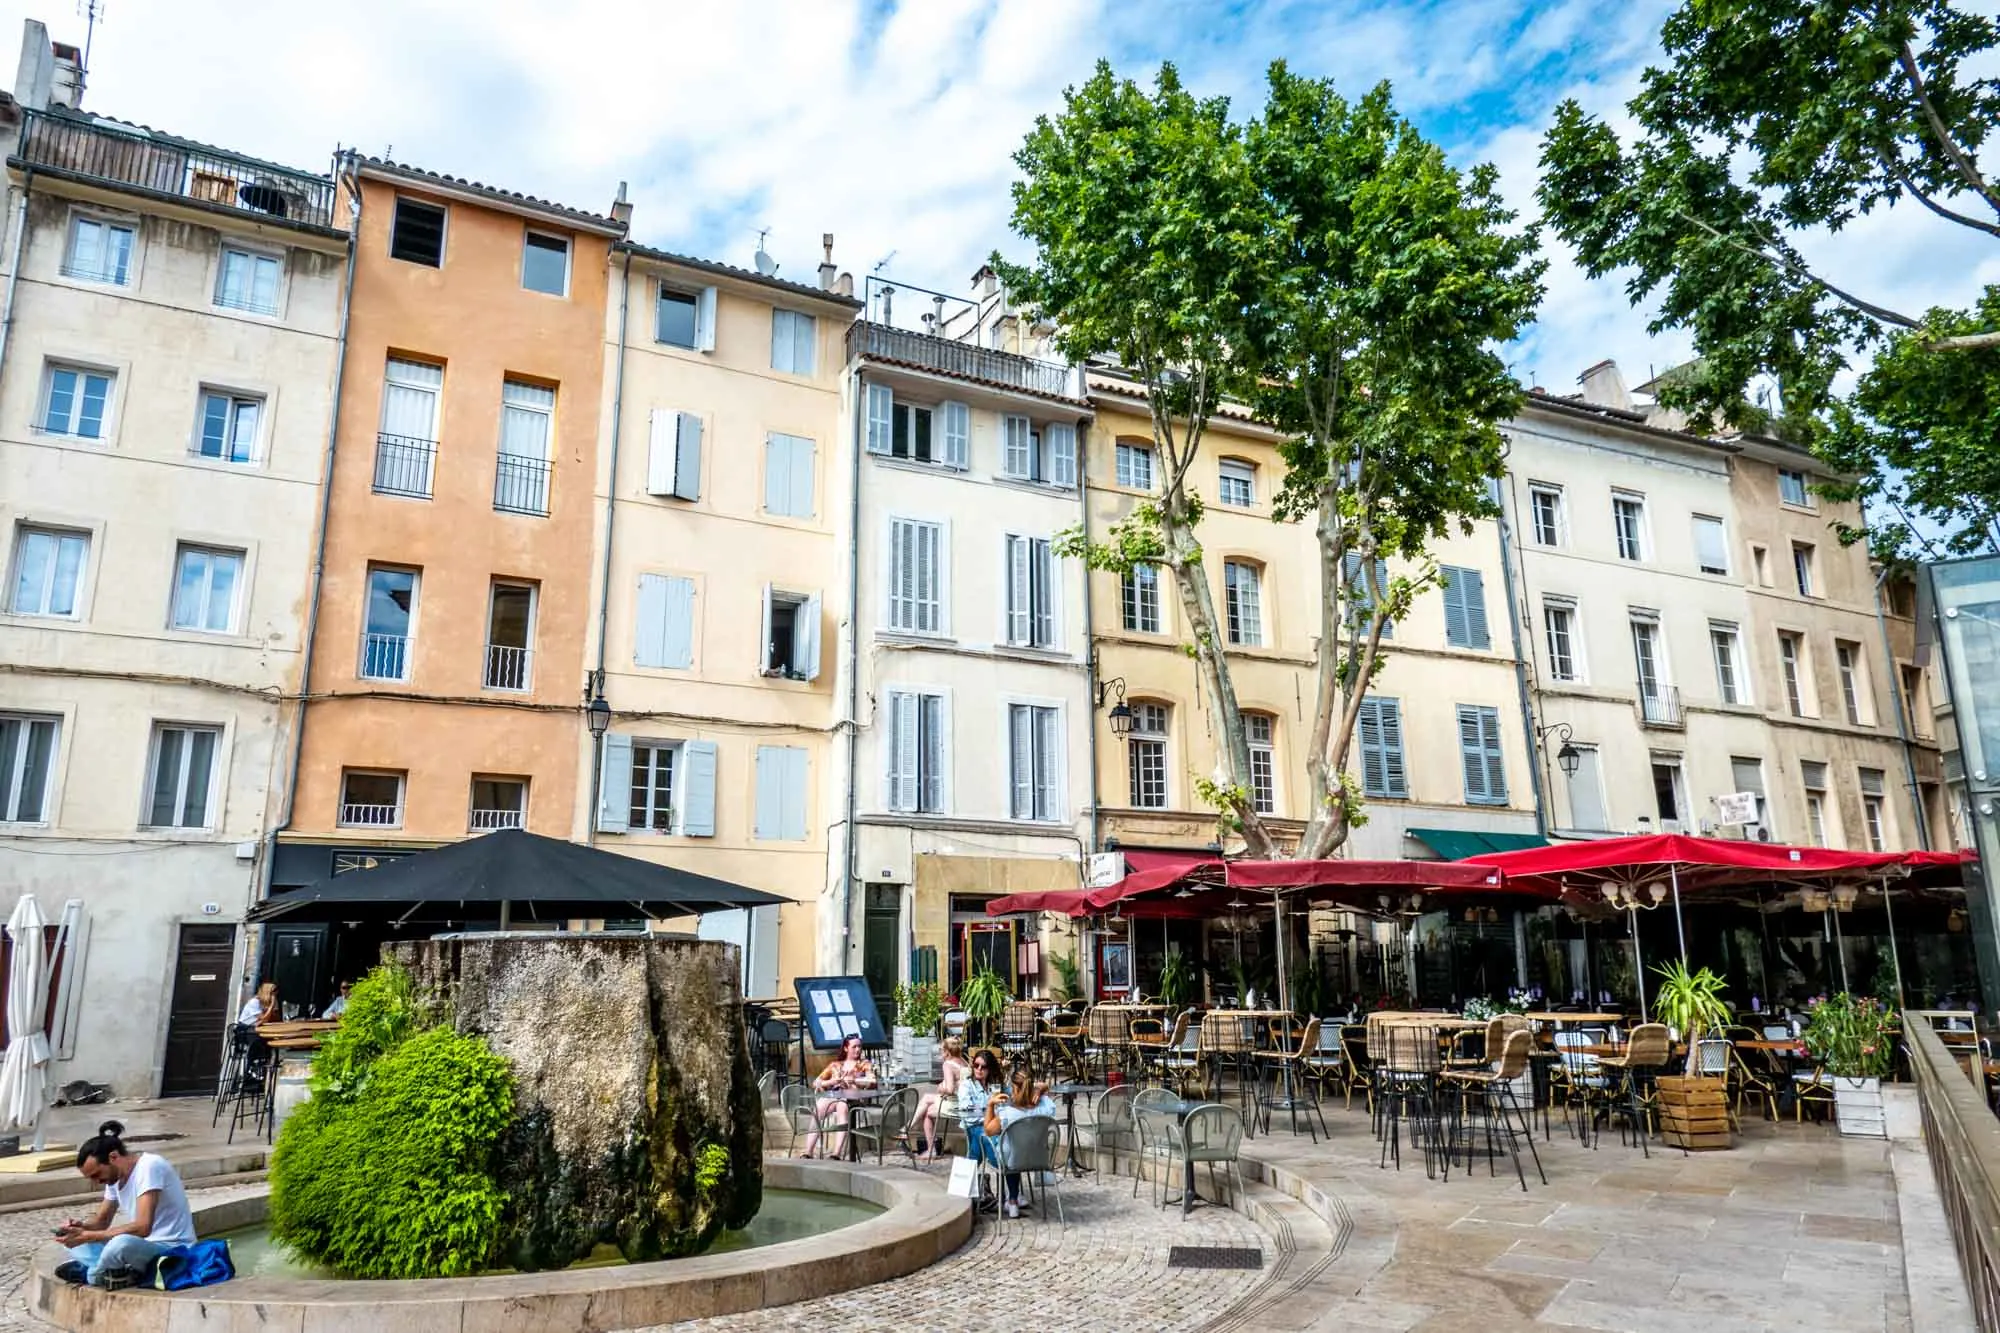 Restaurant seating and a fountain in a city square in Aix-en-Provence.